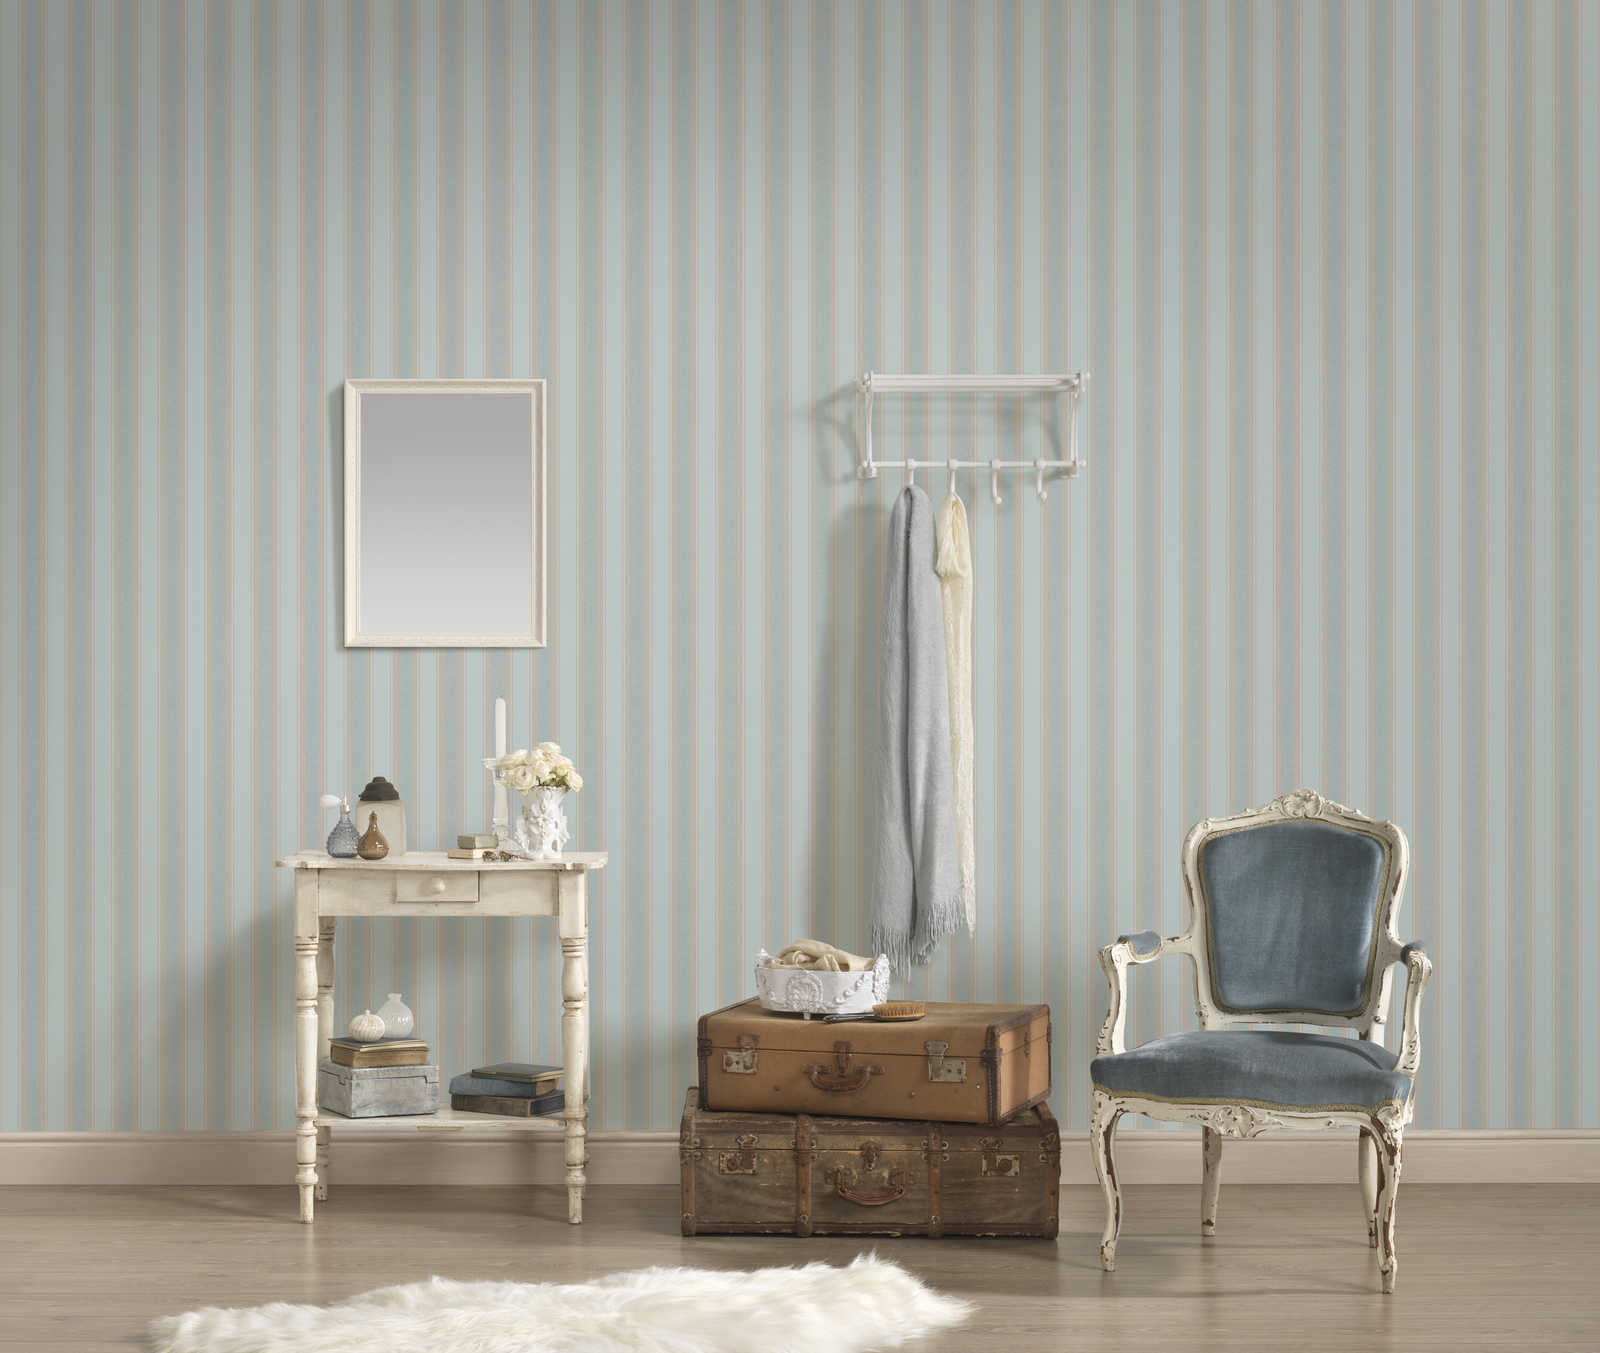             Striped wallpaper with glitter effect - blue, brown
        